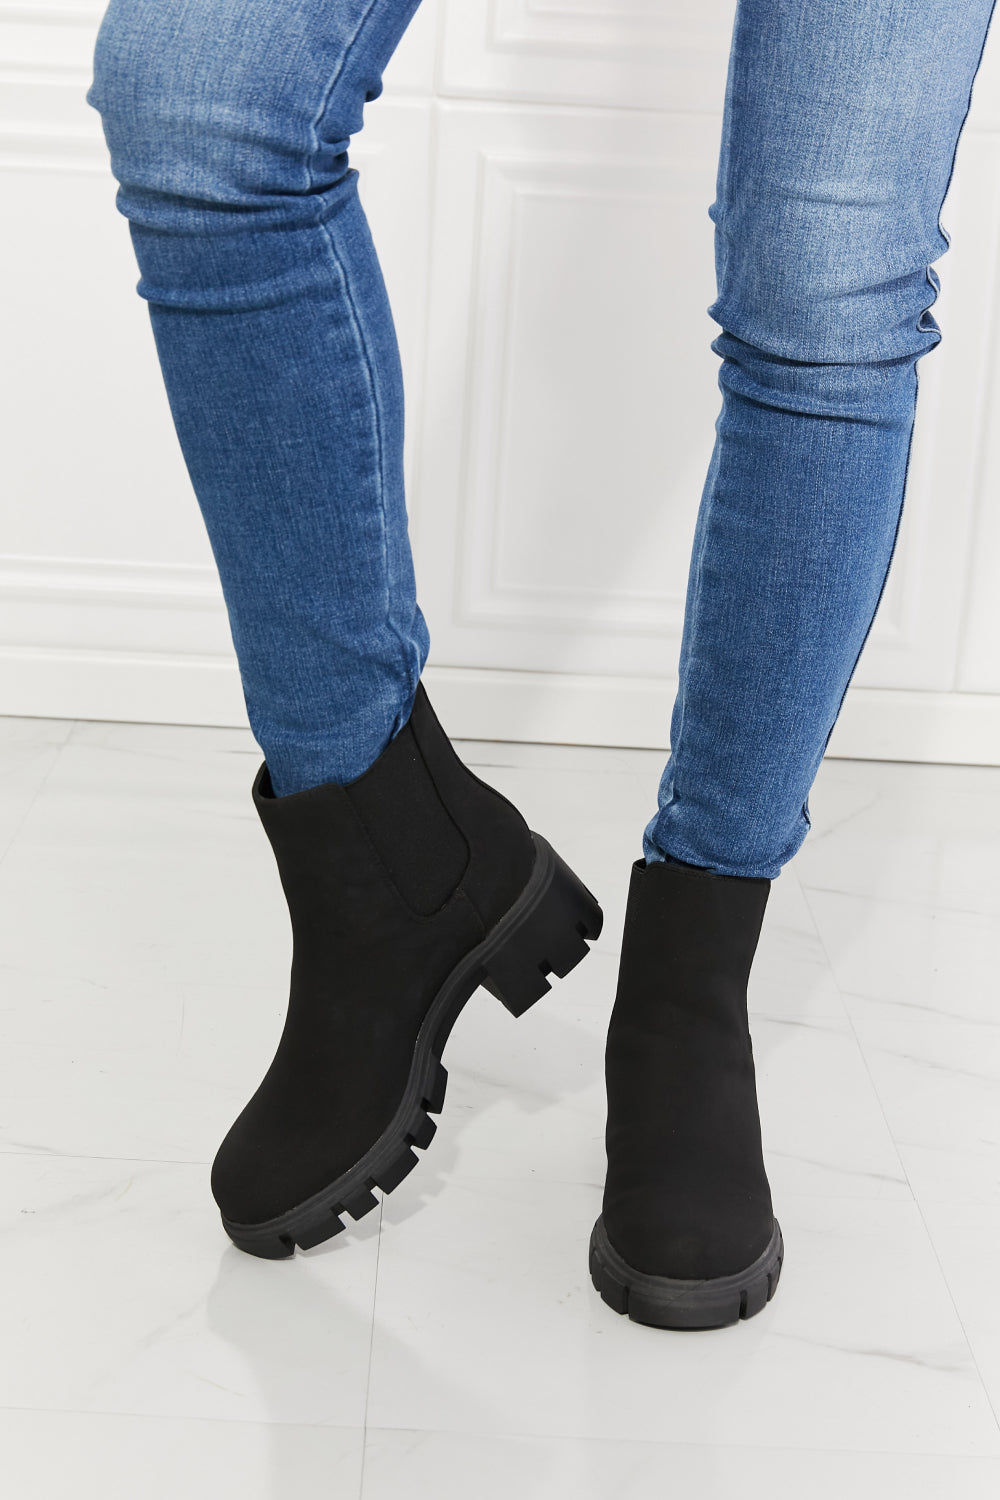 MMShoes Work For It Matte Lug Sole Chelsea Boots in Black COCO CRESS